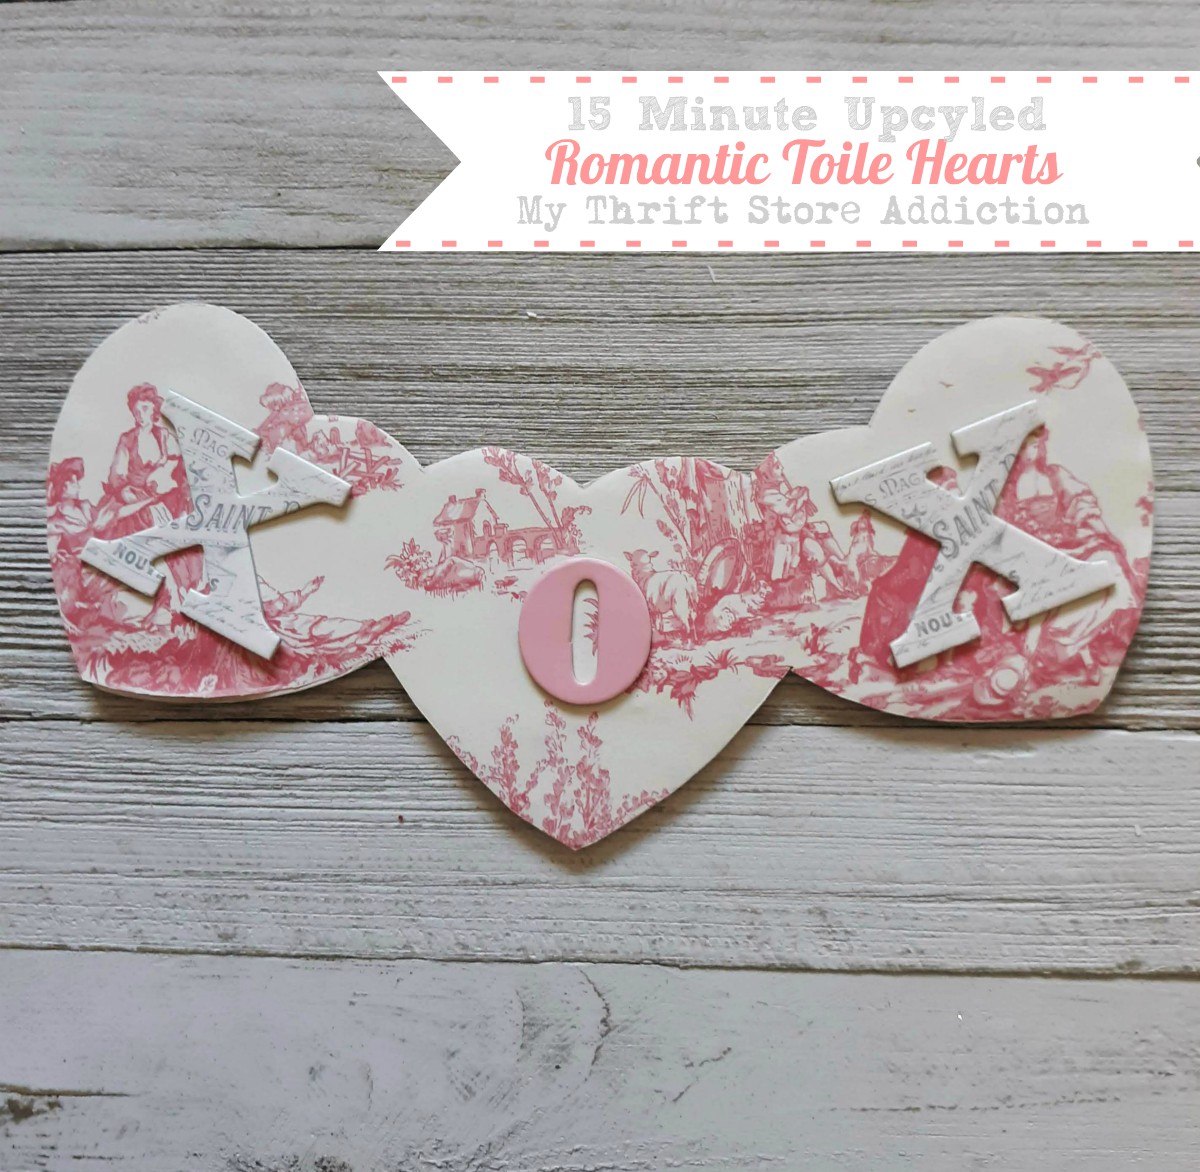 upcycled romantic toile hearts